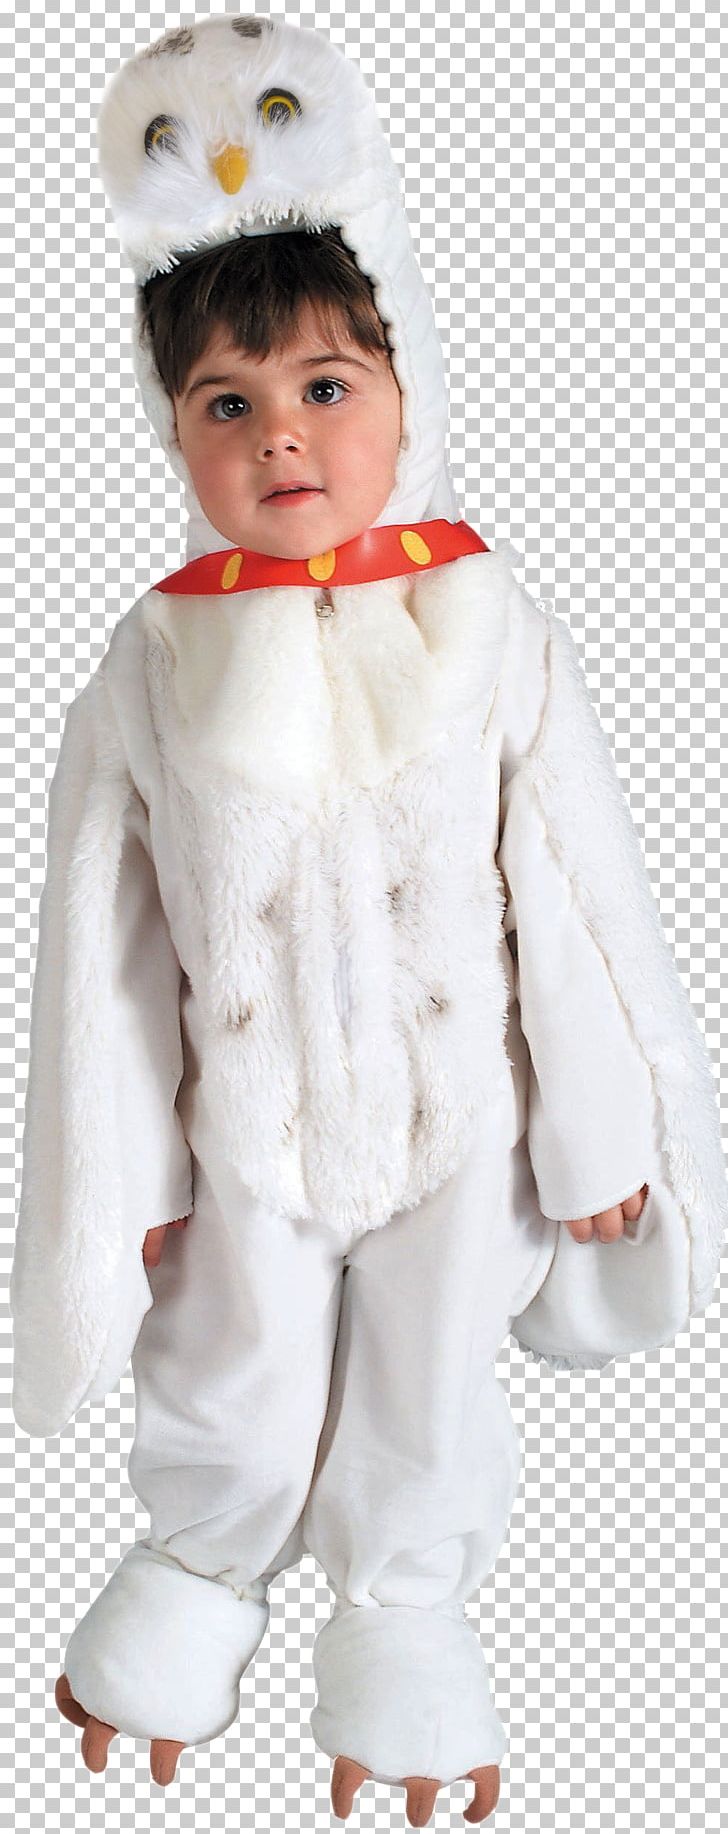 Hermione Granger Hedwig Halloween Costume Albus Dumbledore PNG, Clipart, Albus Dumbledore, Boy, Child, Clothing, Cosplay Free PNG Download